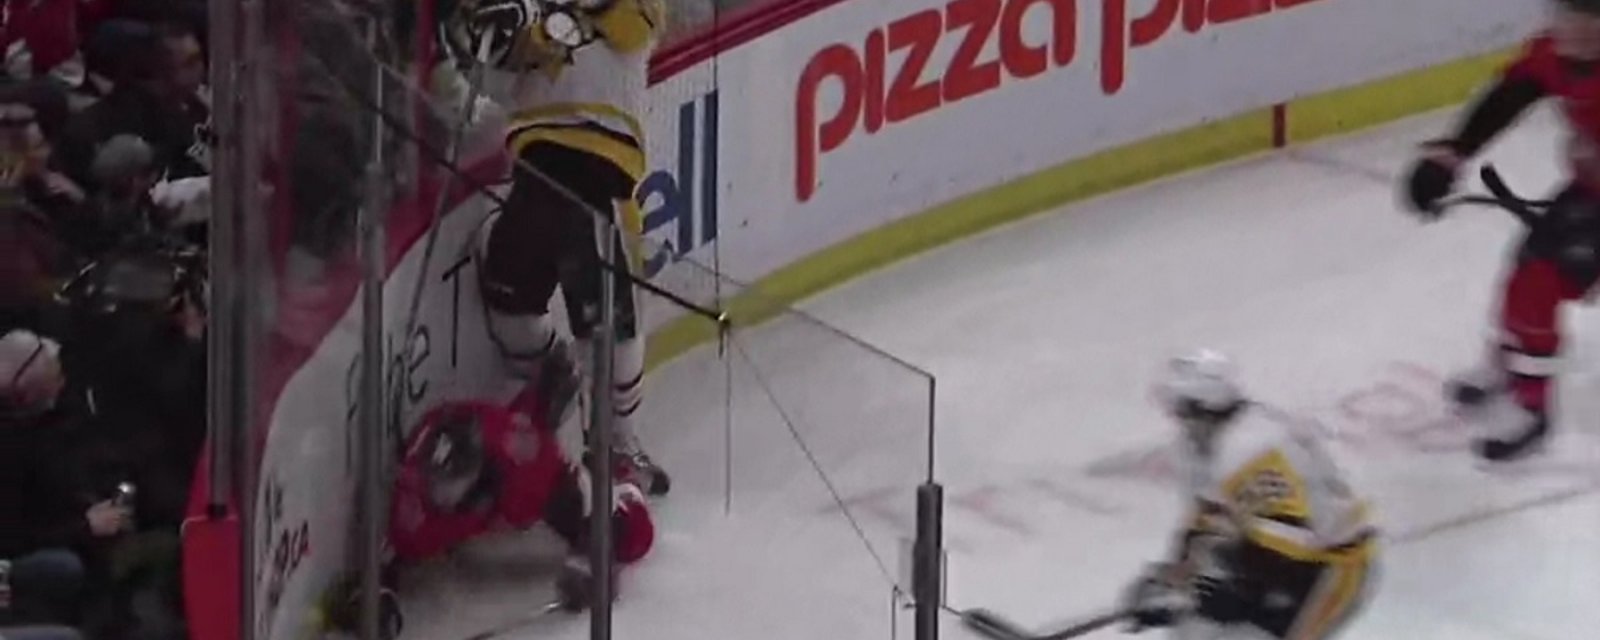 Crosby gets rocked by an elbow to the head.